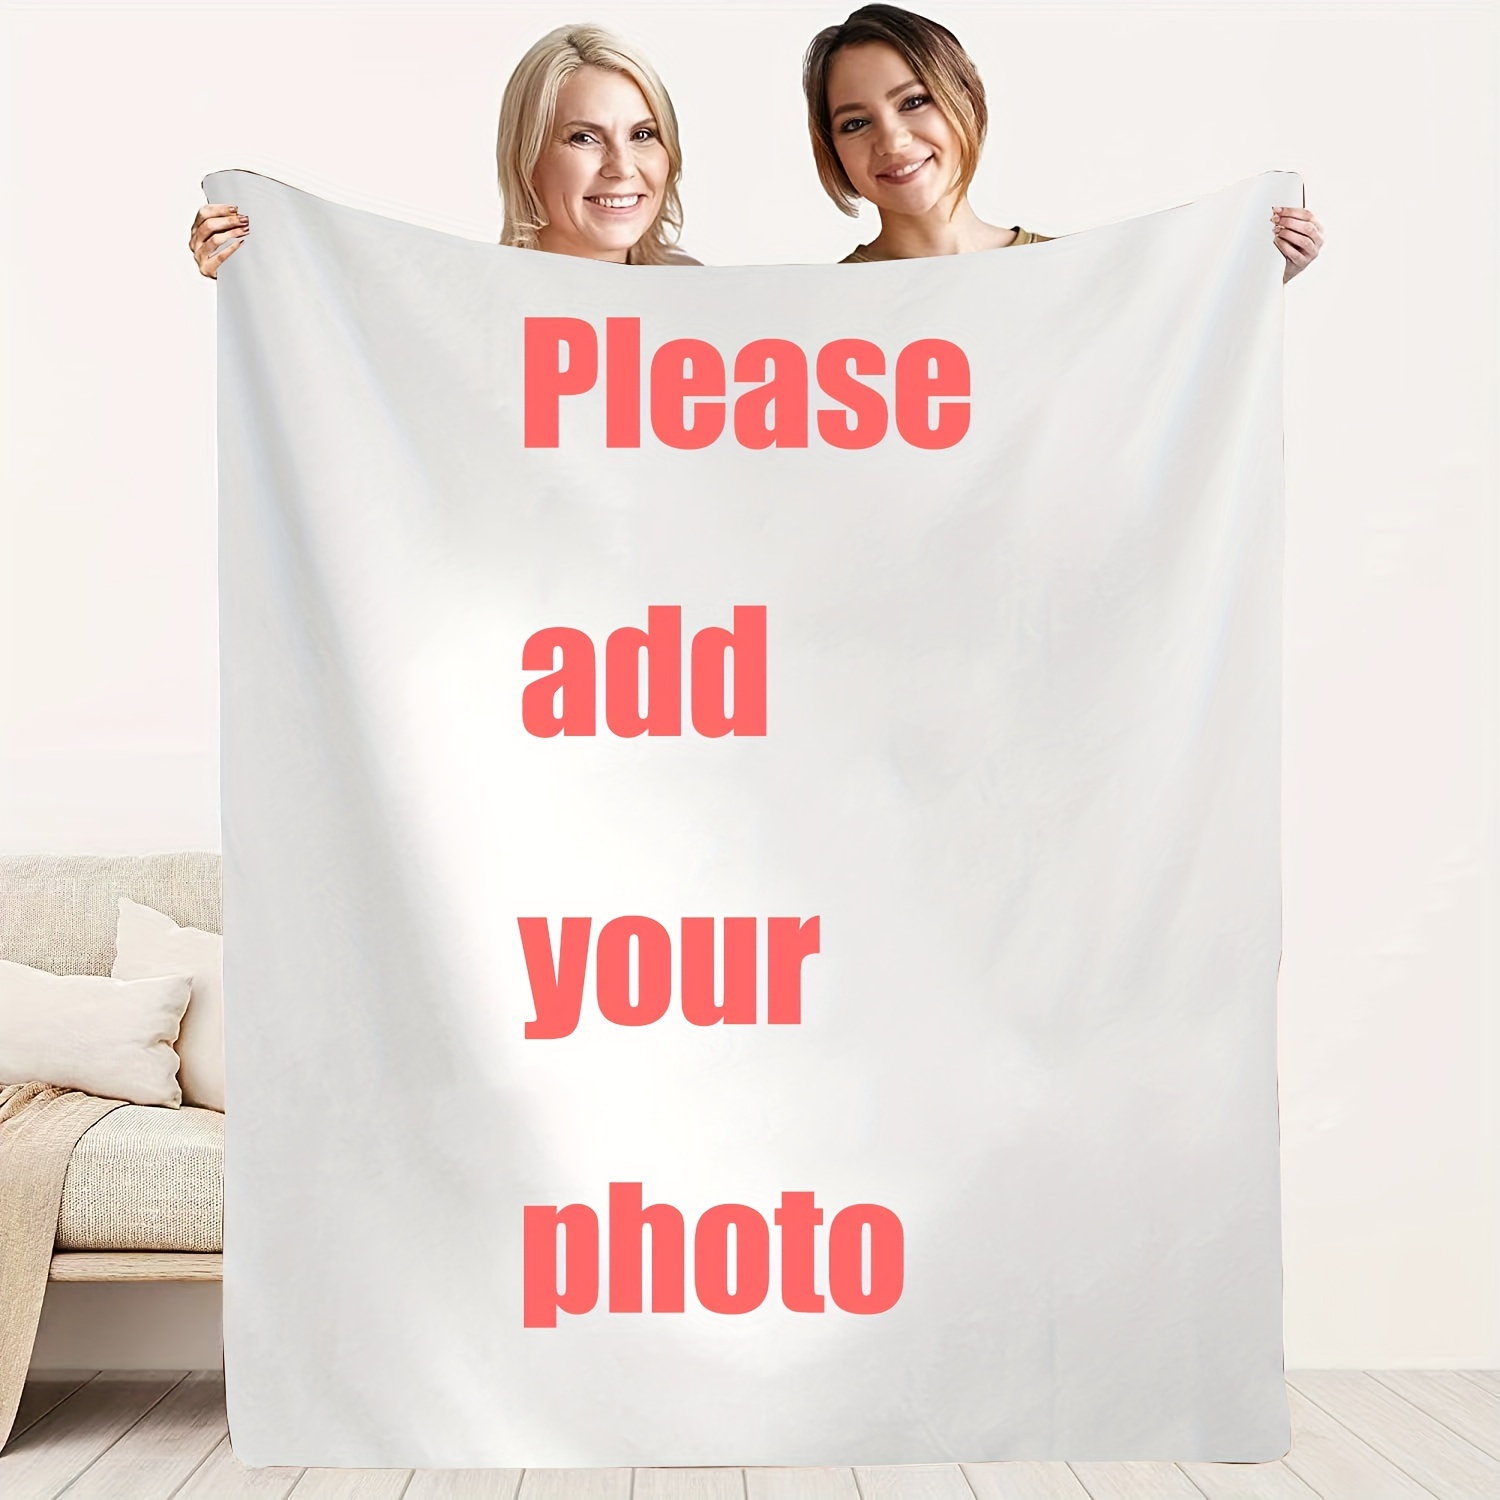 

Custom Photo Blanket - Personalized Gift For Sisters, Best Friends | Ideal For Birthdays, Holidays & More | Soft Flannel, All-season Comfort | Perfect For Couch, Bed, Travel & Office